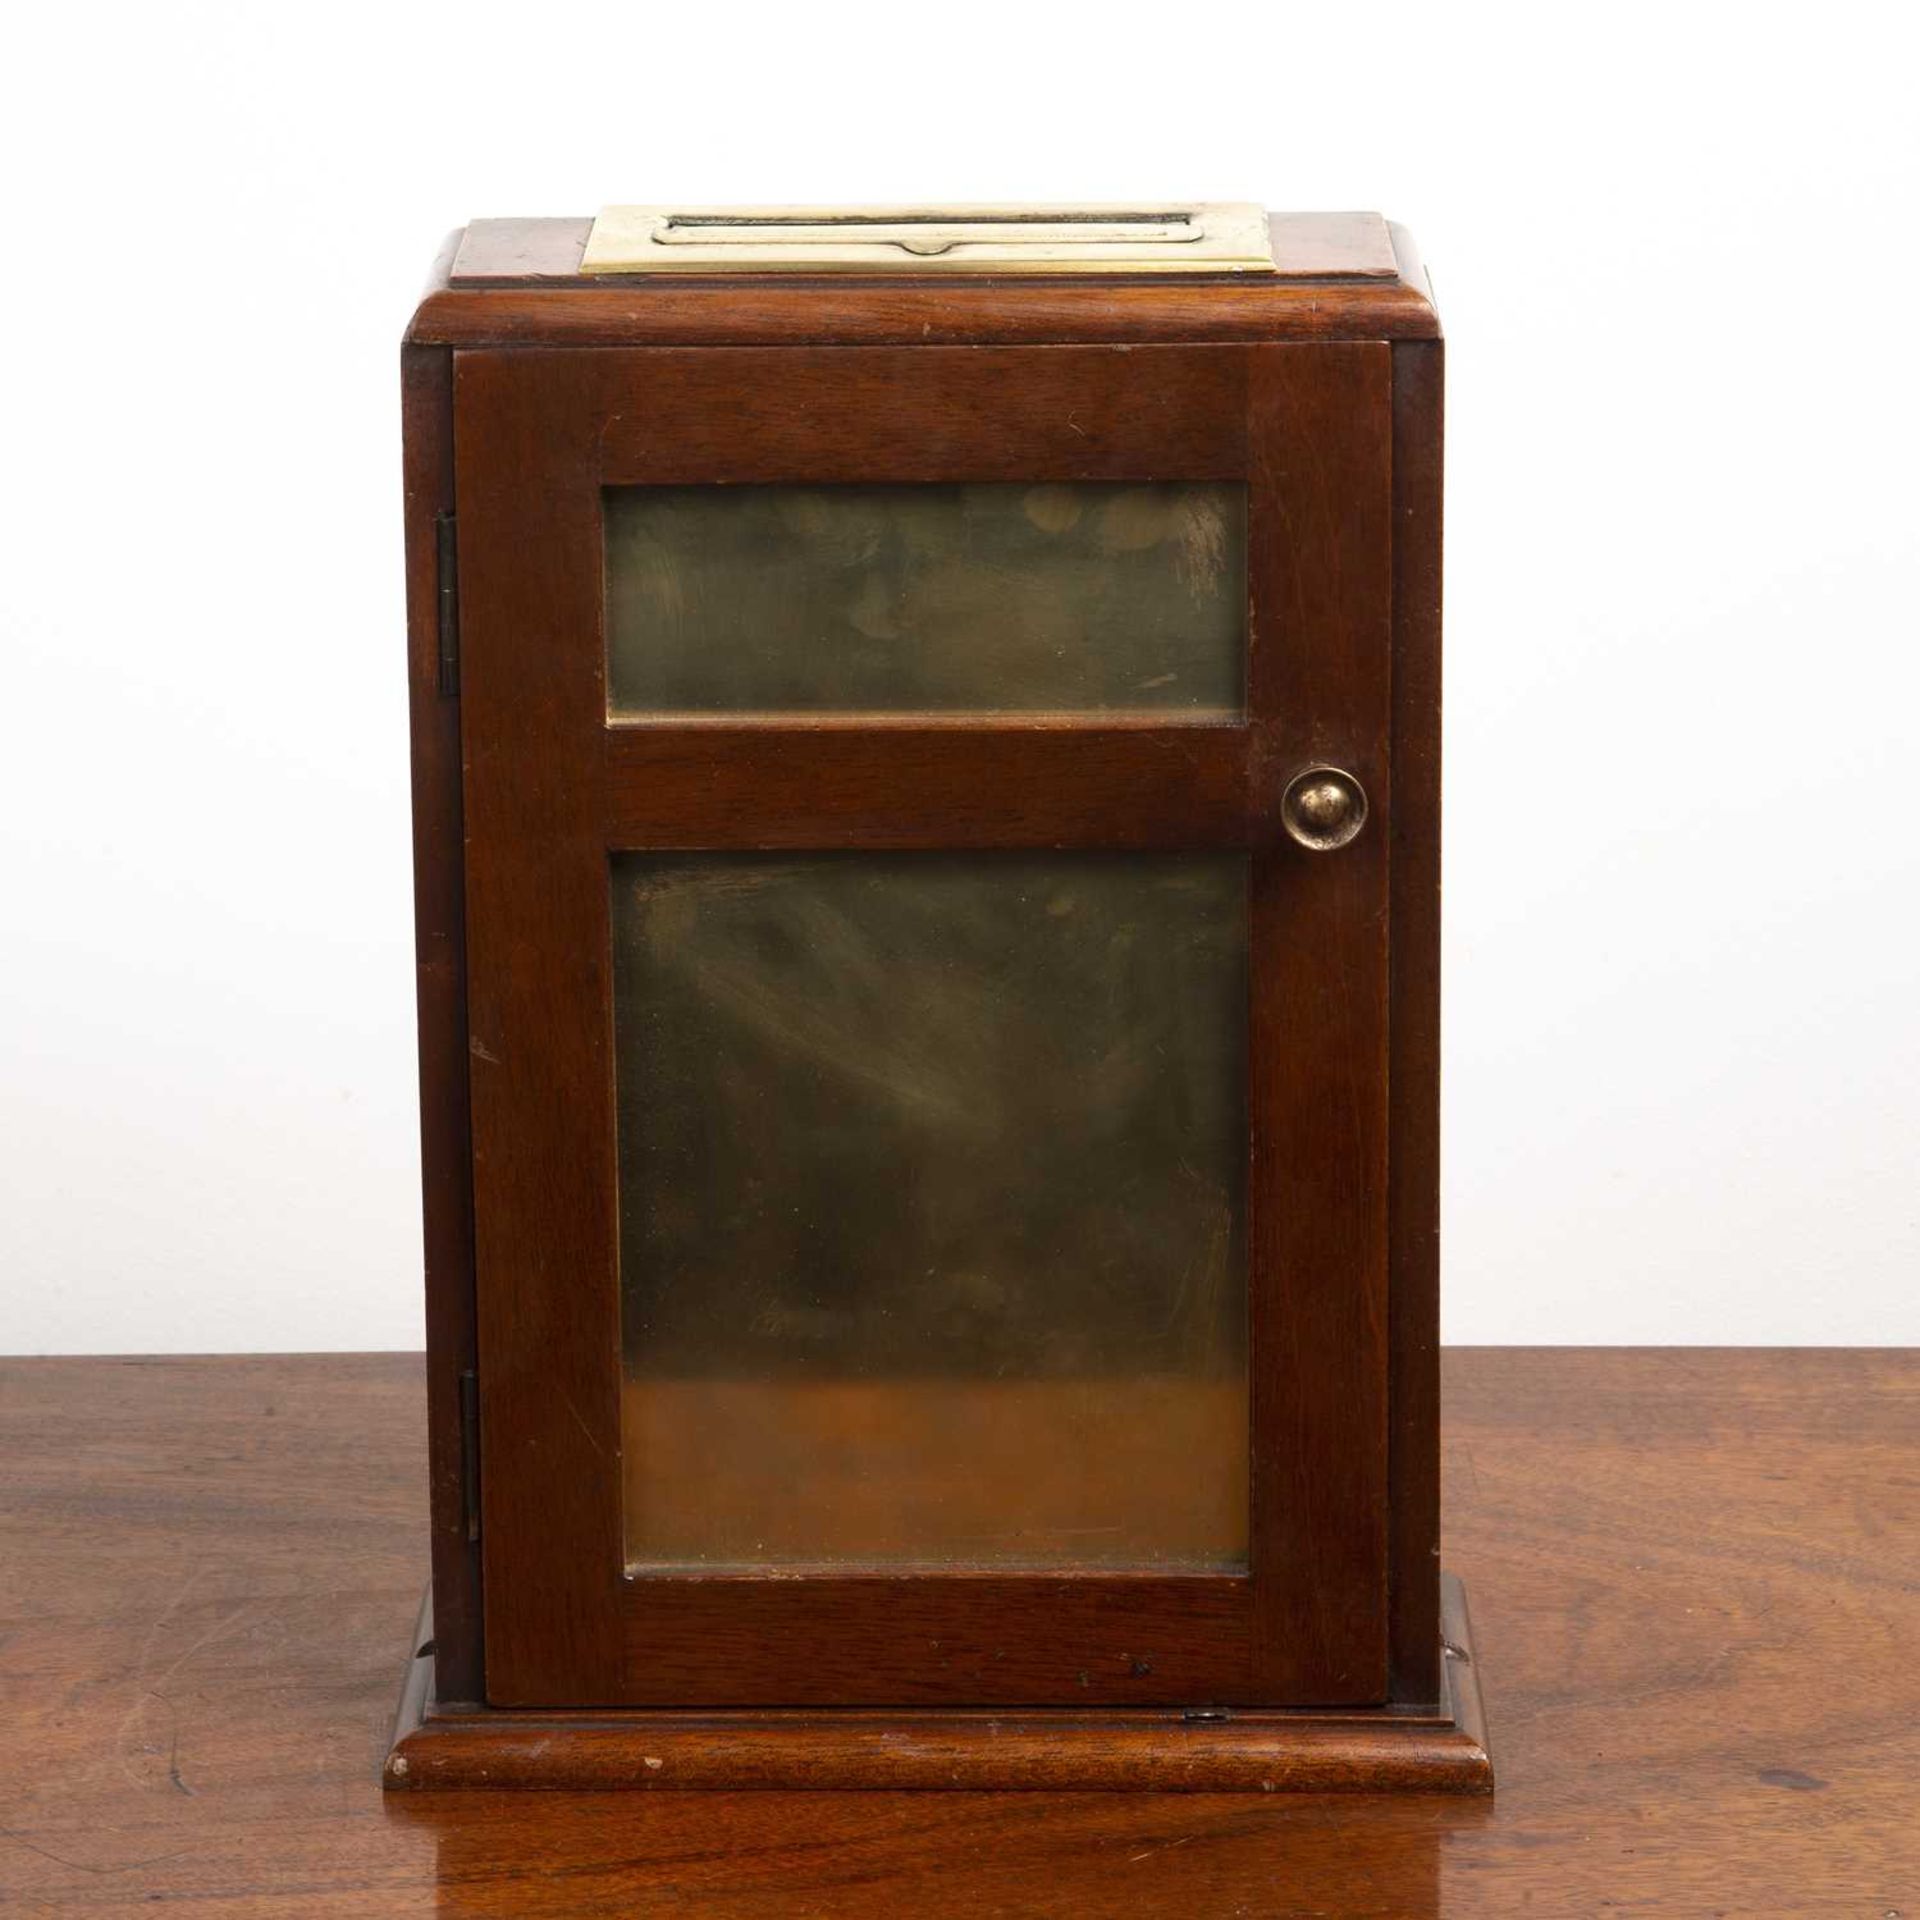 Mahogany and brass fronted ballot/vote box late 19th/early 20th Century, 25cm wide x 34cm high x - Image 3 of 5